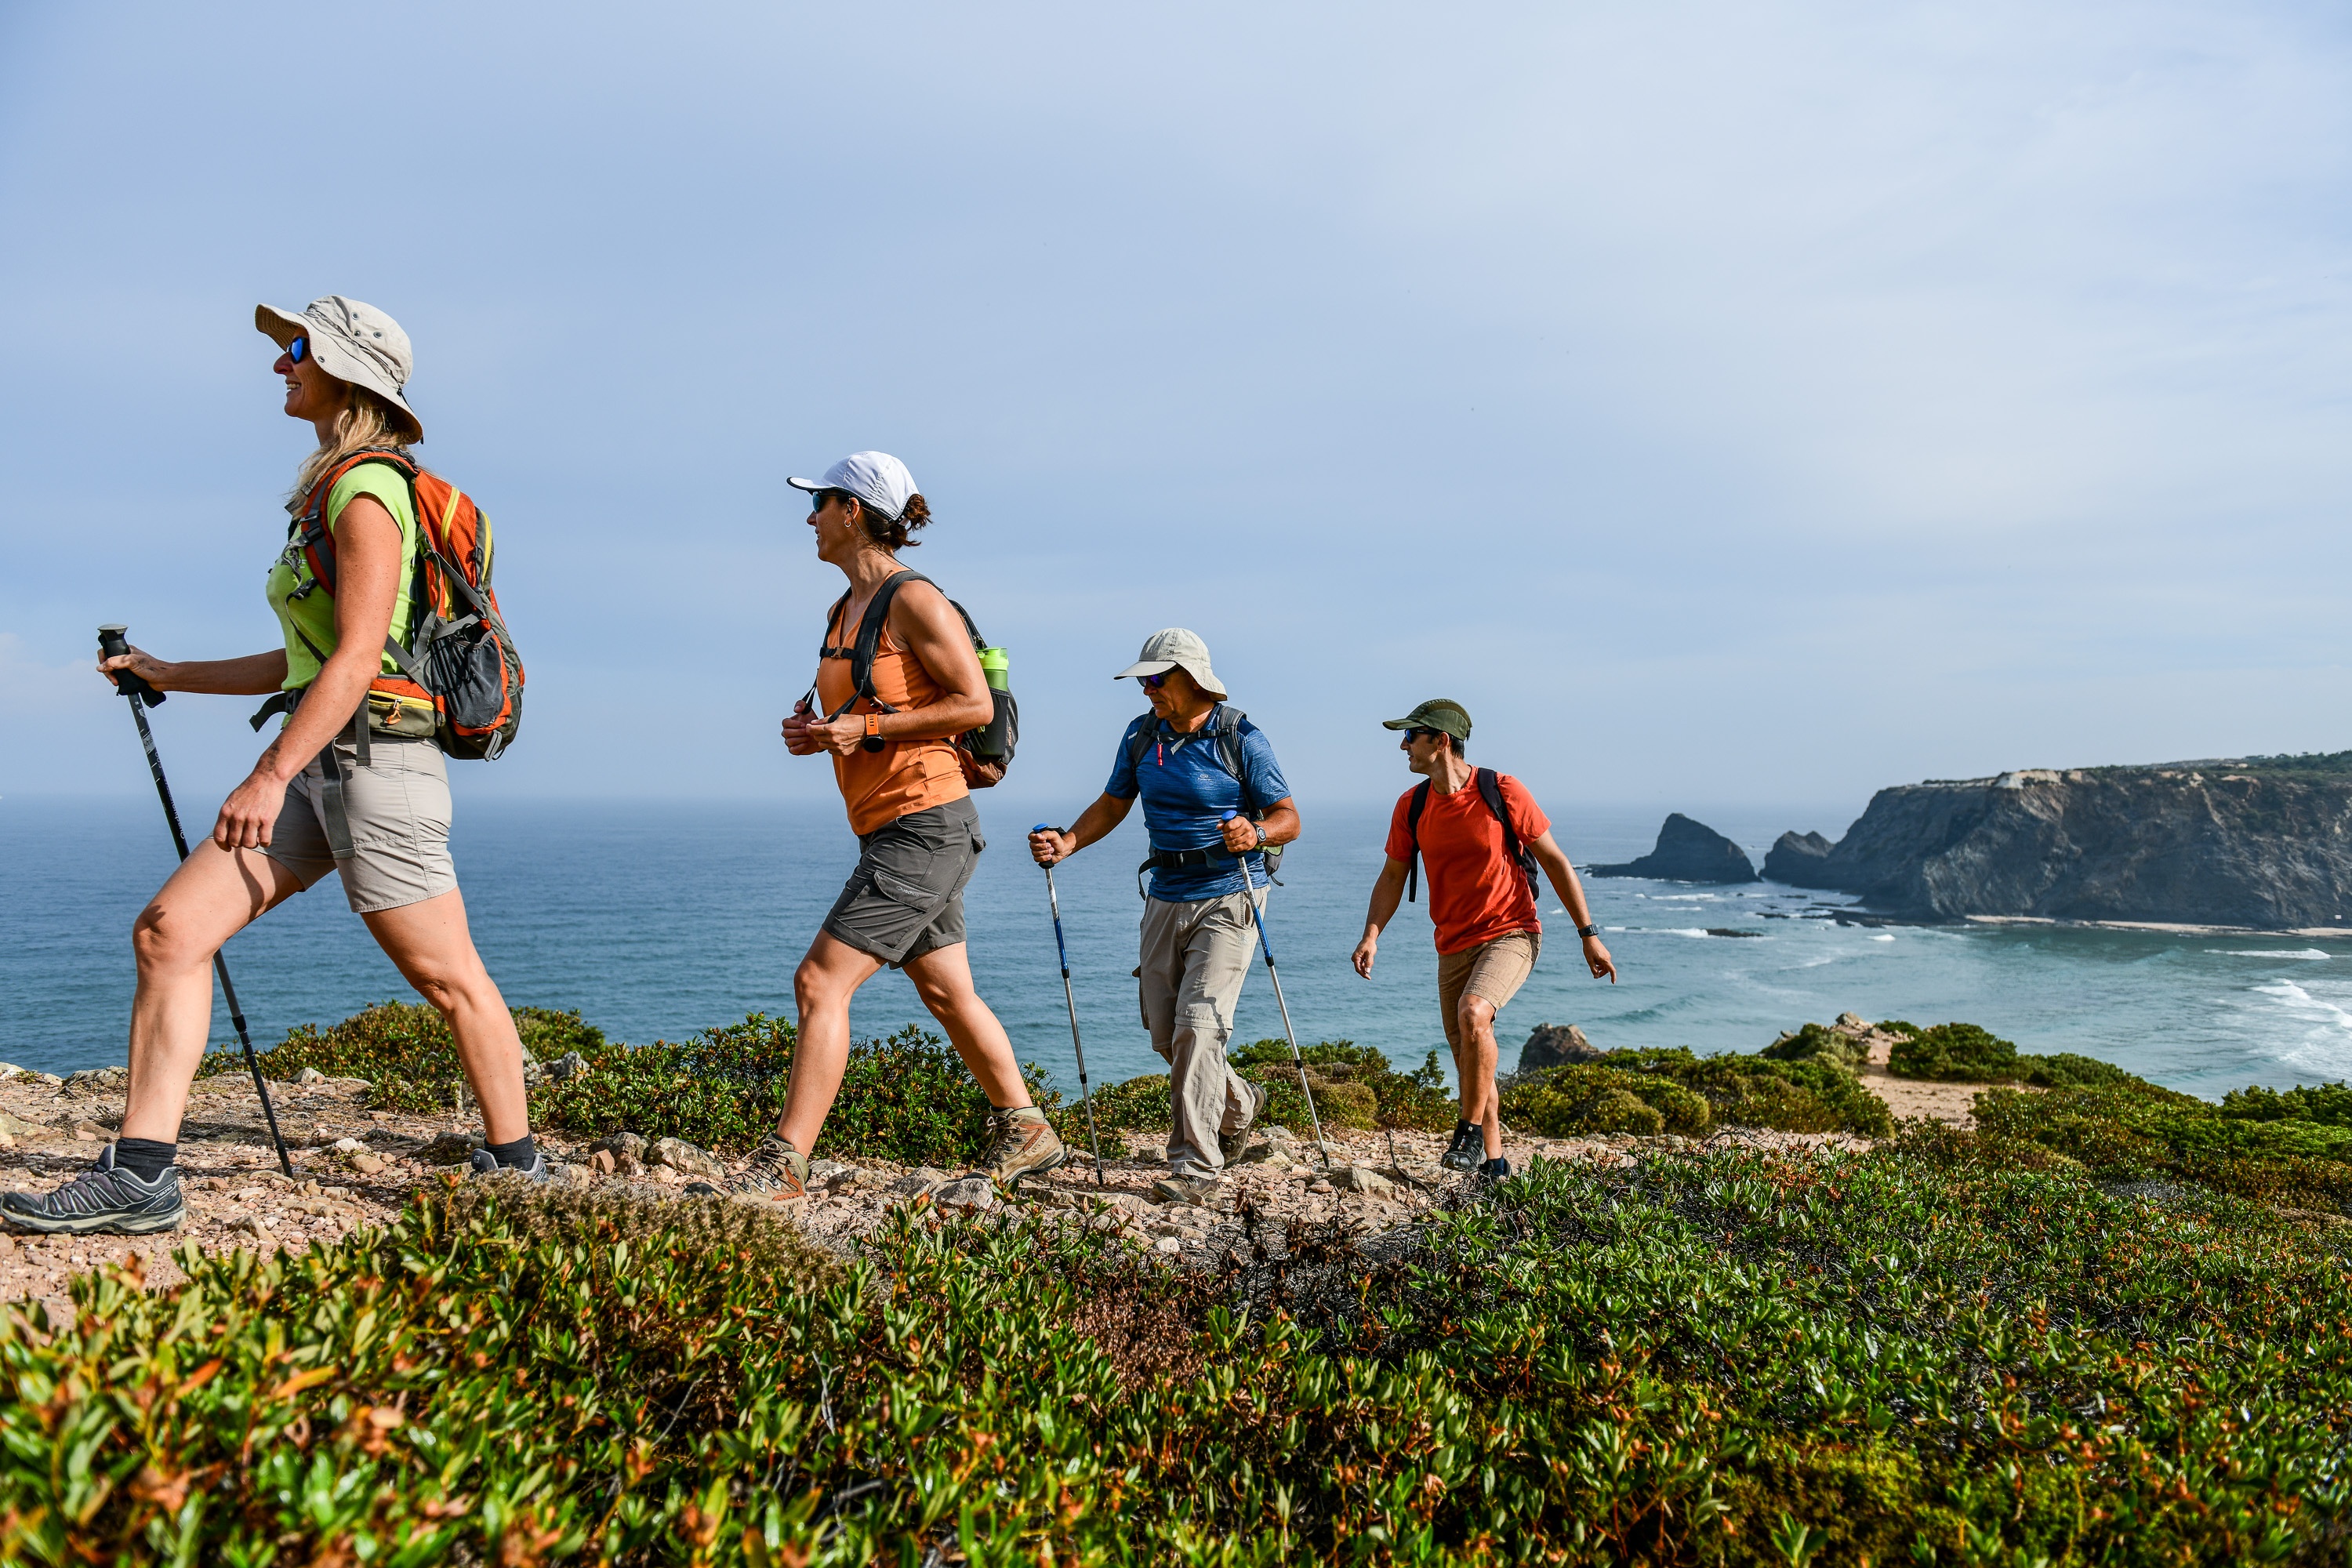 guided hiking tours portugal